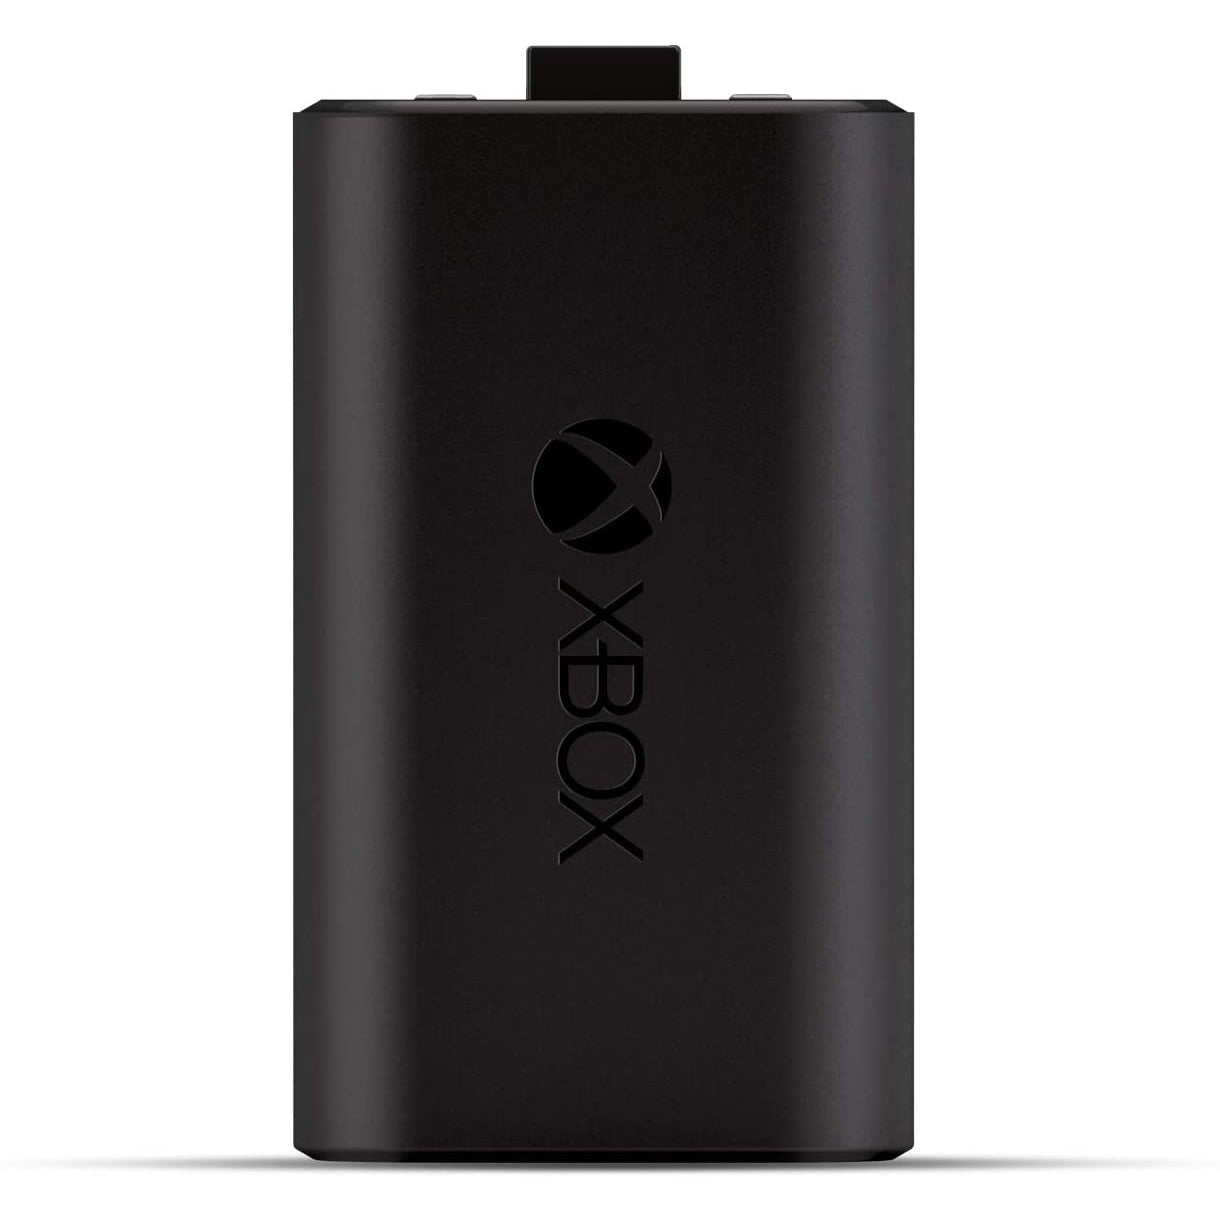 Microsoft S3V-00014 Xbox One Play and Charge Kit Black